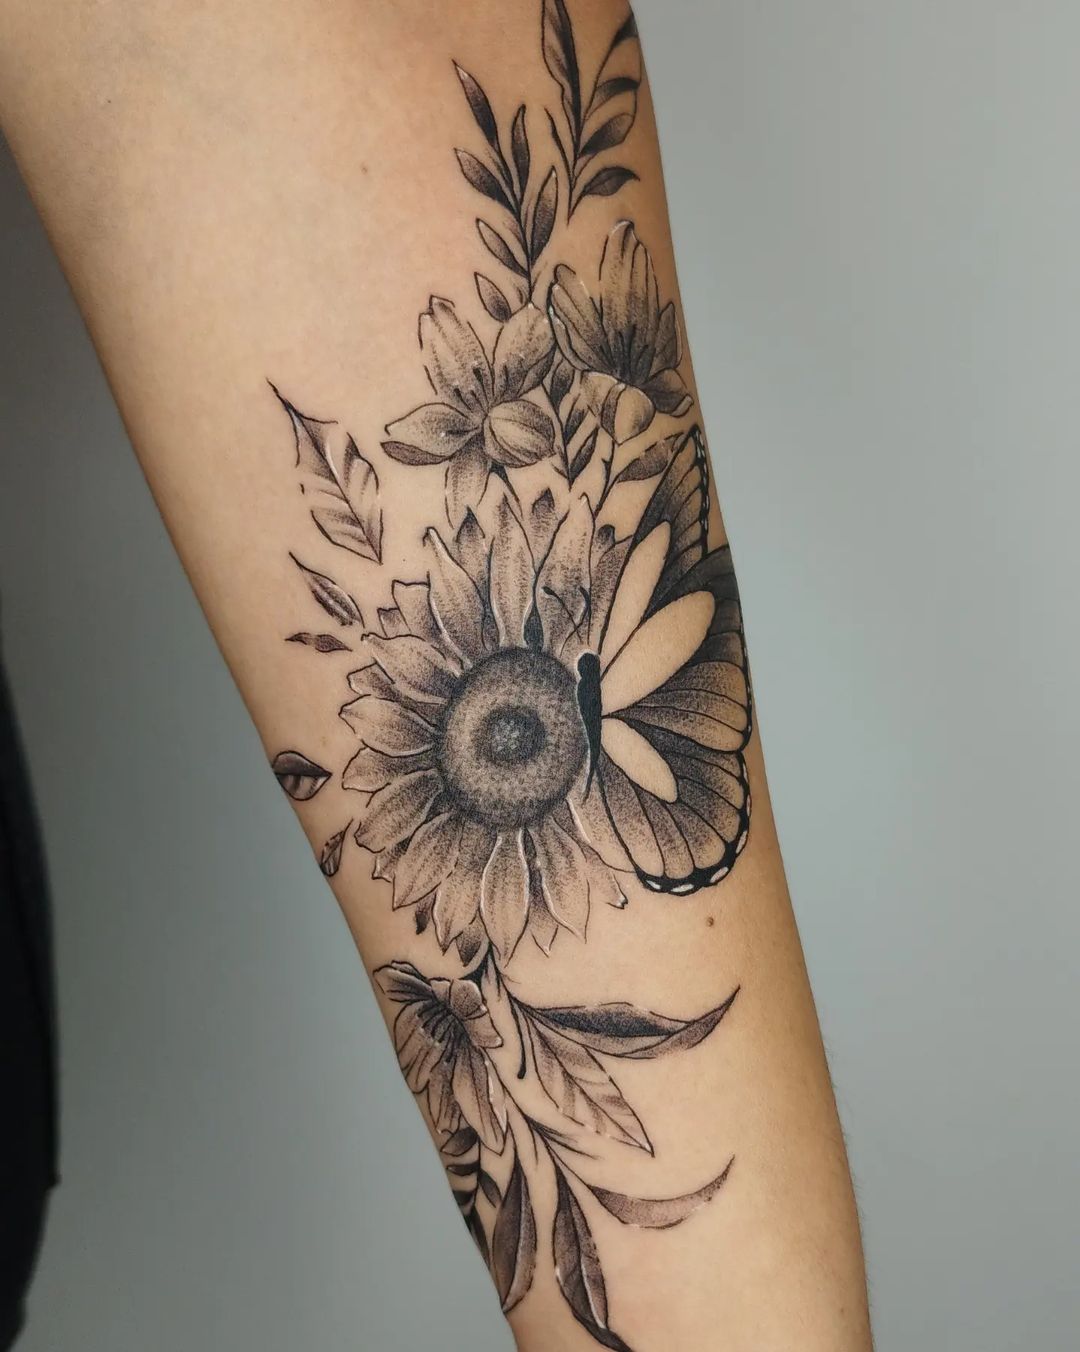 Sunflower and Butterfly Tattoo on Arm